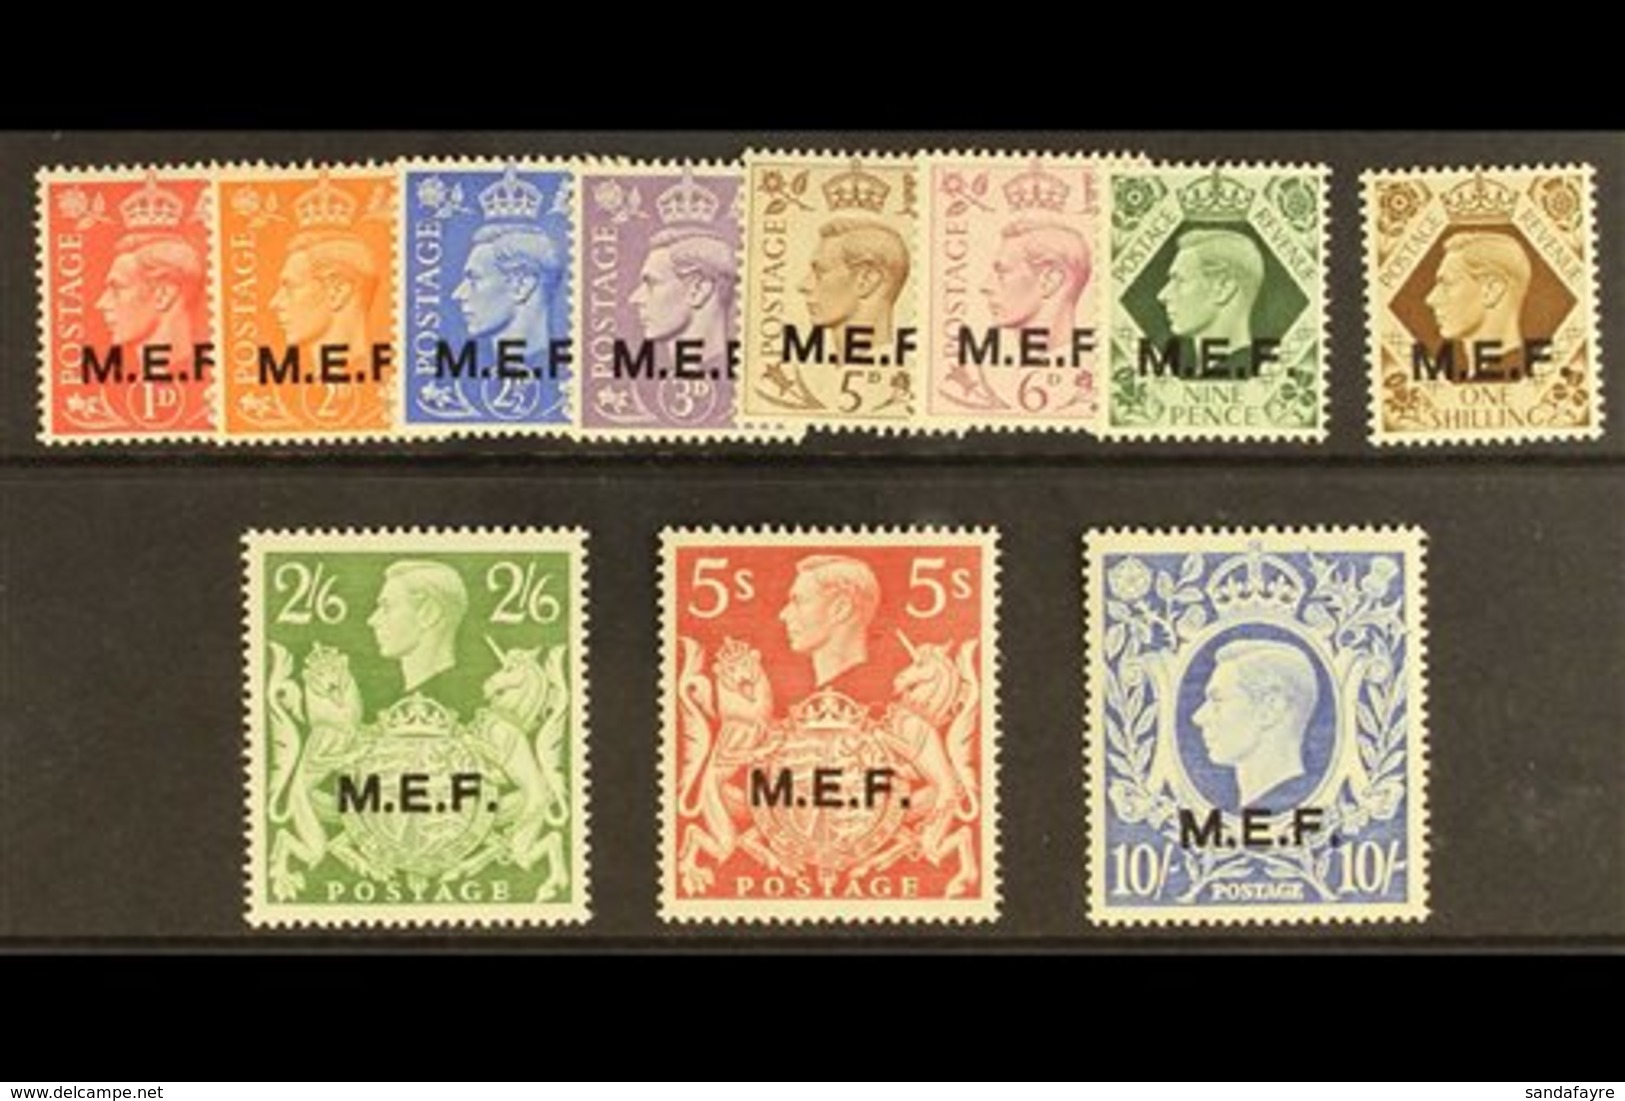 MIDDLE EAST FORCES  1943-47 "M.E.F." Overprints Complete Set, SG M11/M21, Never Hinged Mint. (11 Stamps) For More Images - Italian Eastern Africa